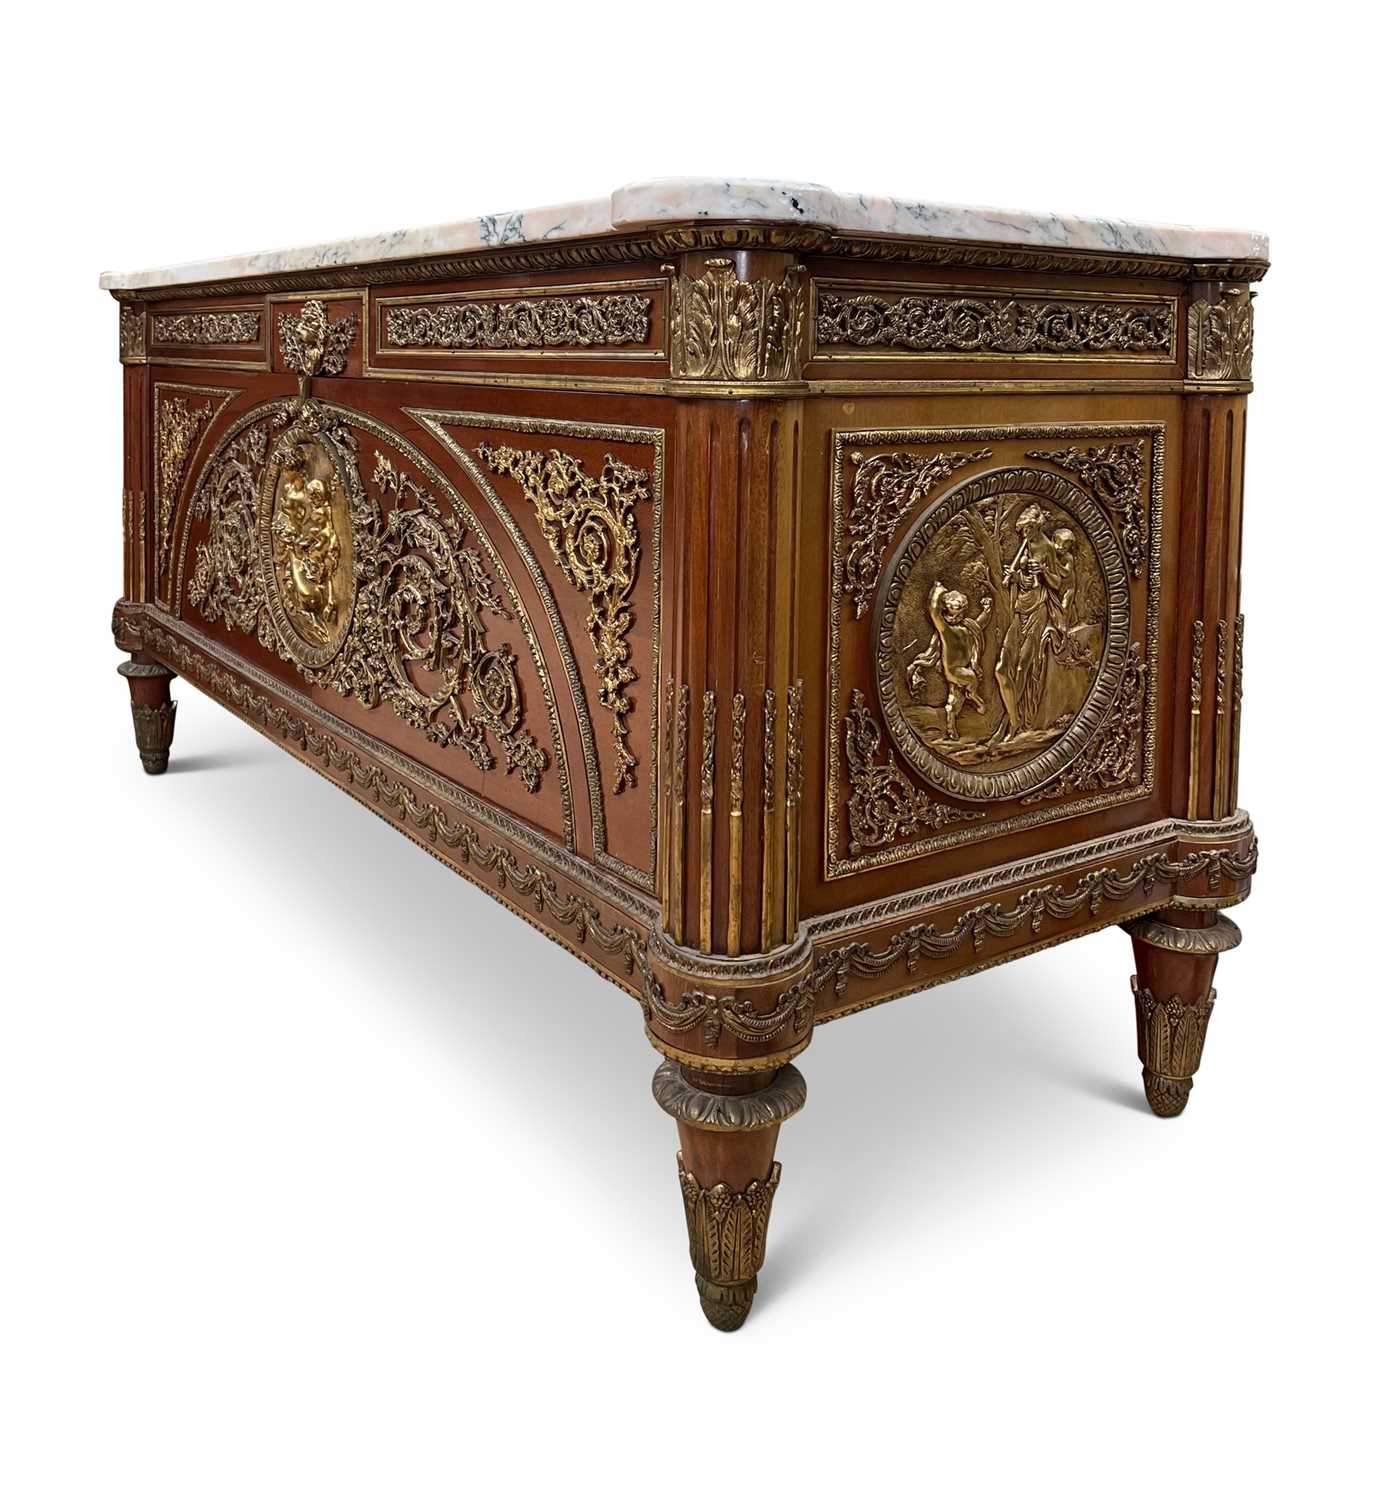 AN IMPRESSIVE ORMOLU MOUNTED COMMODE AFTER THE MODEL PRODUCED FOR MARIE-ANTOINETTE - Image 3 of 3